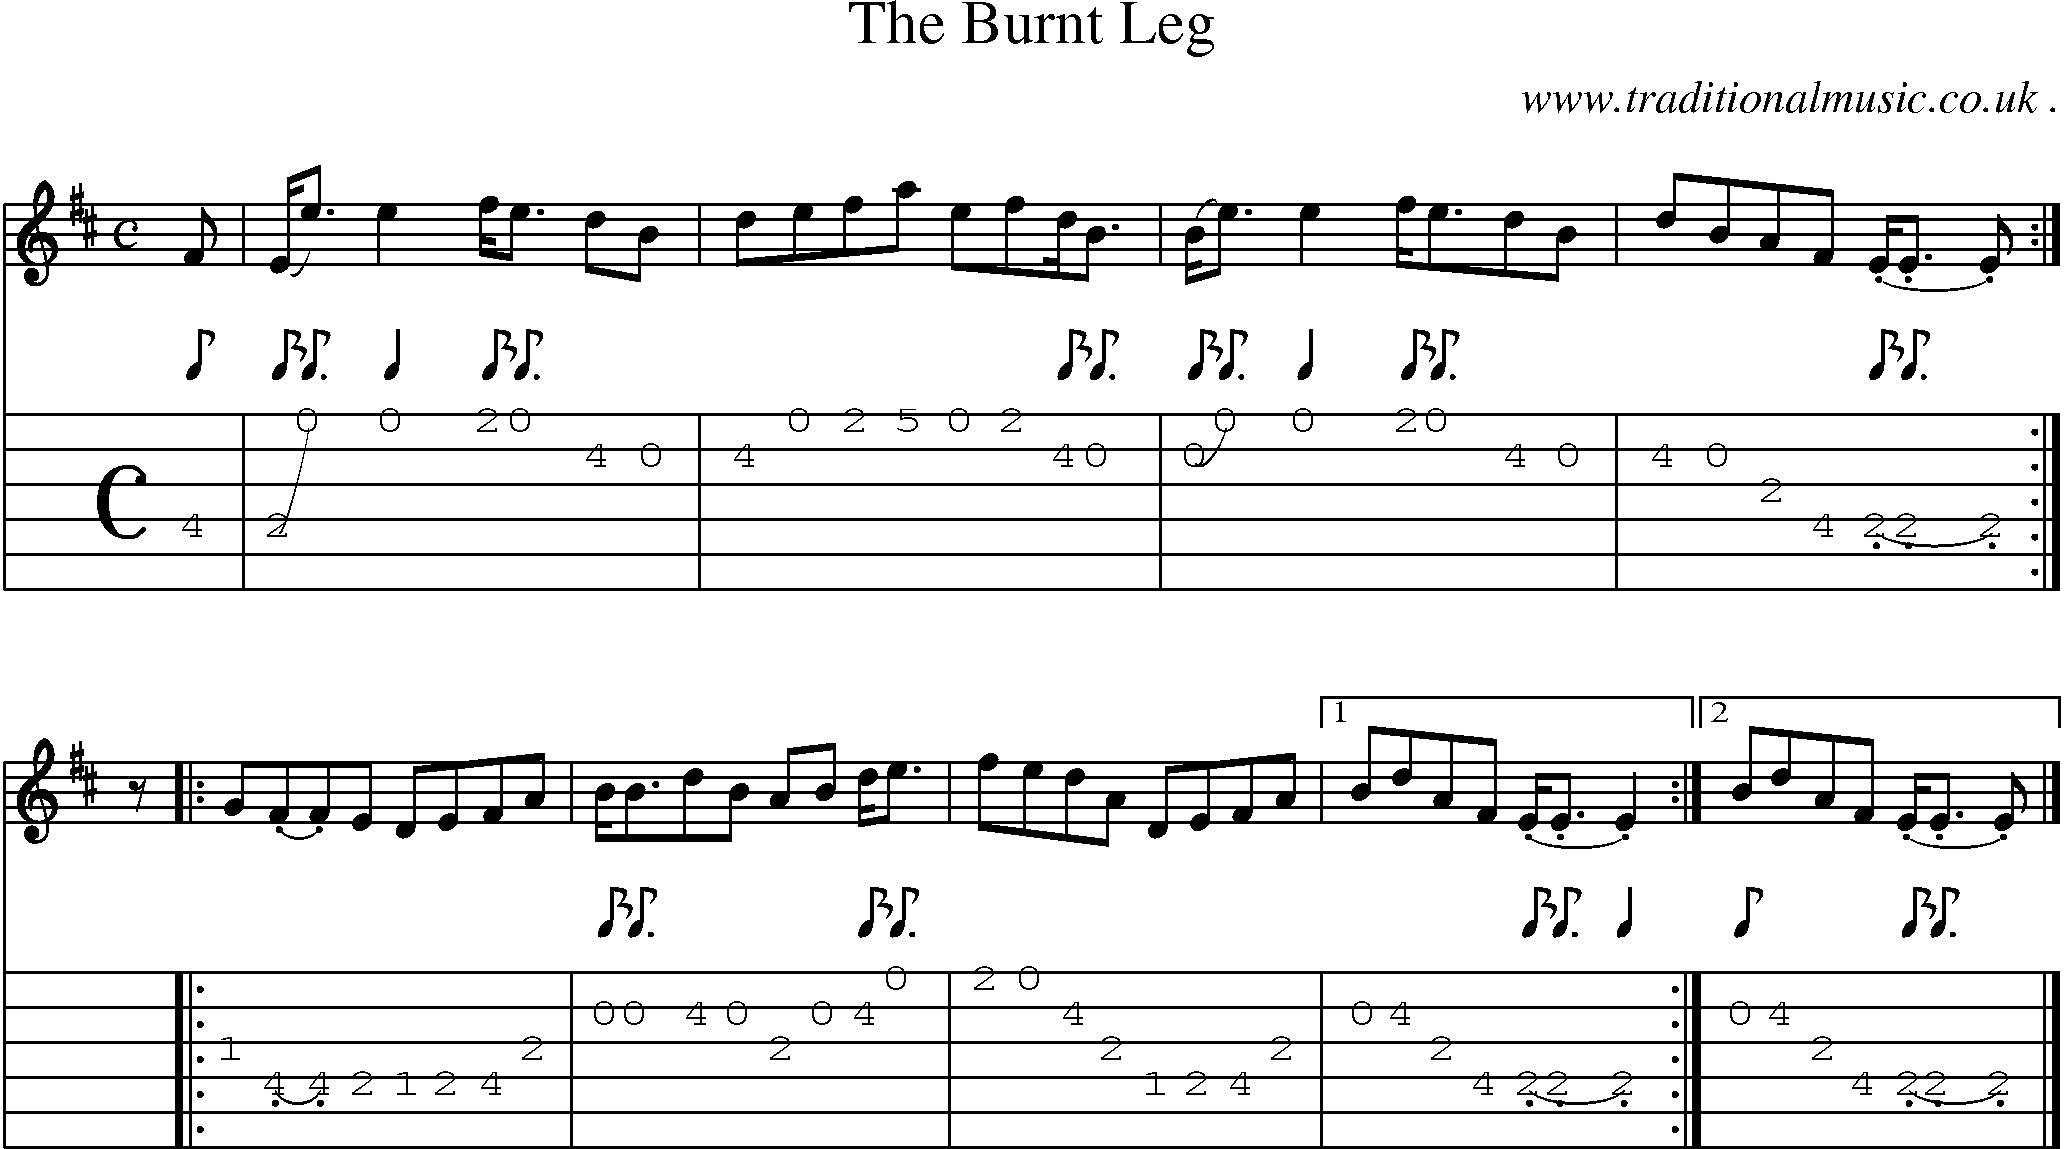 Sheet-music  score, Chords and Guitar Tabs for The Burnt Leg